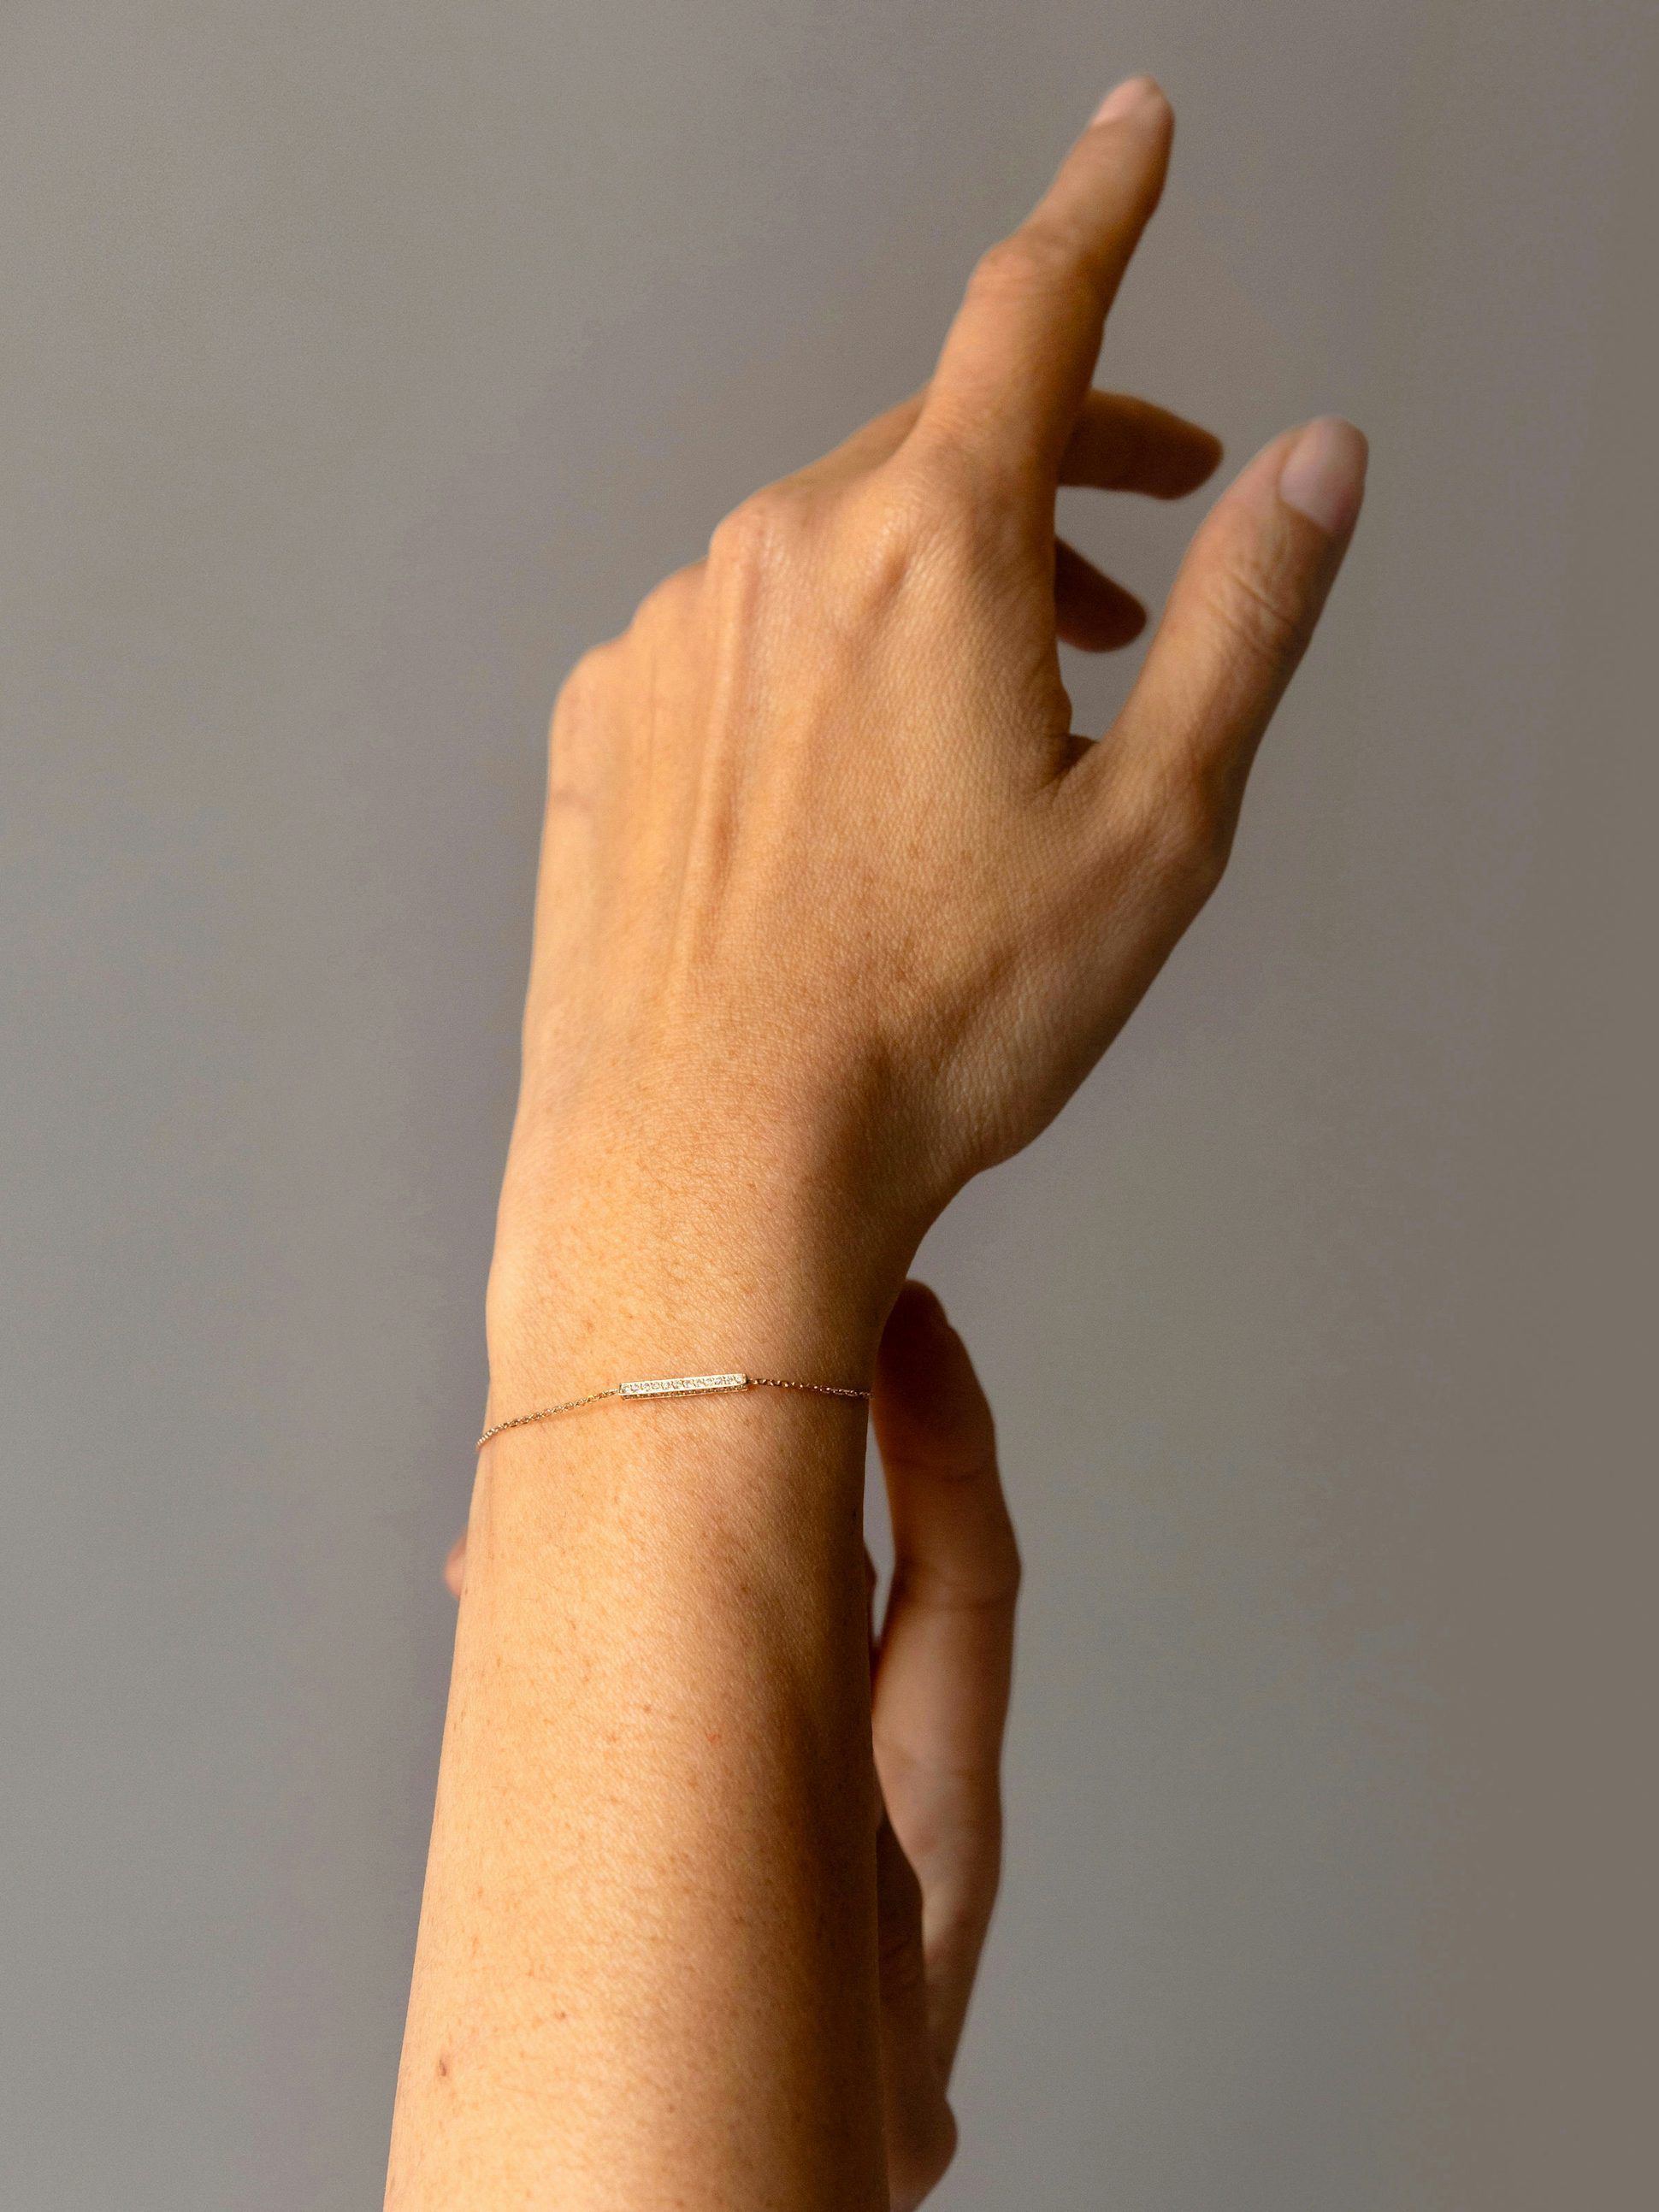 Anagramme paved bracelet in 18k Fairmined ethical yellow gold, on a chain | JEM jewellery ethically minded